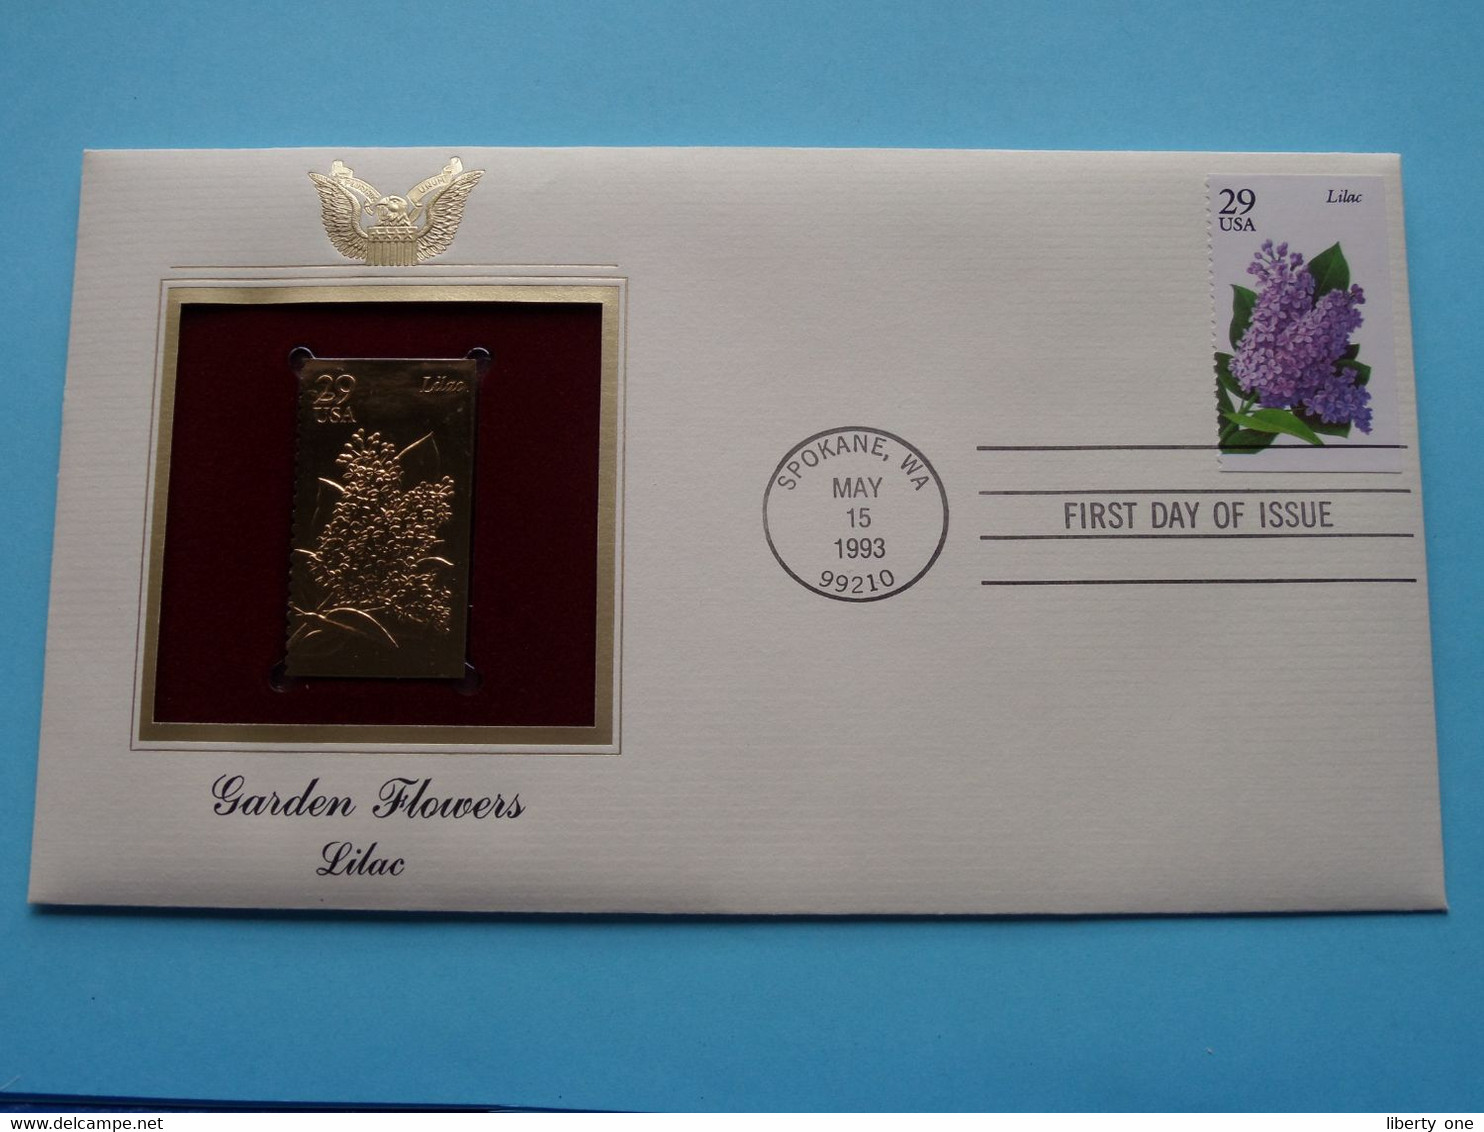 GARDEN FLOWERS - LILAC ( 22kt Gold Stamp Replica ) First Day Of Issue 1993 > USA ! - 1991-2000